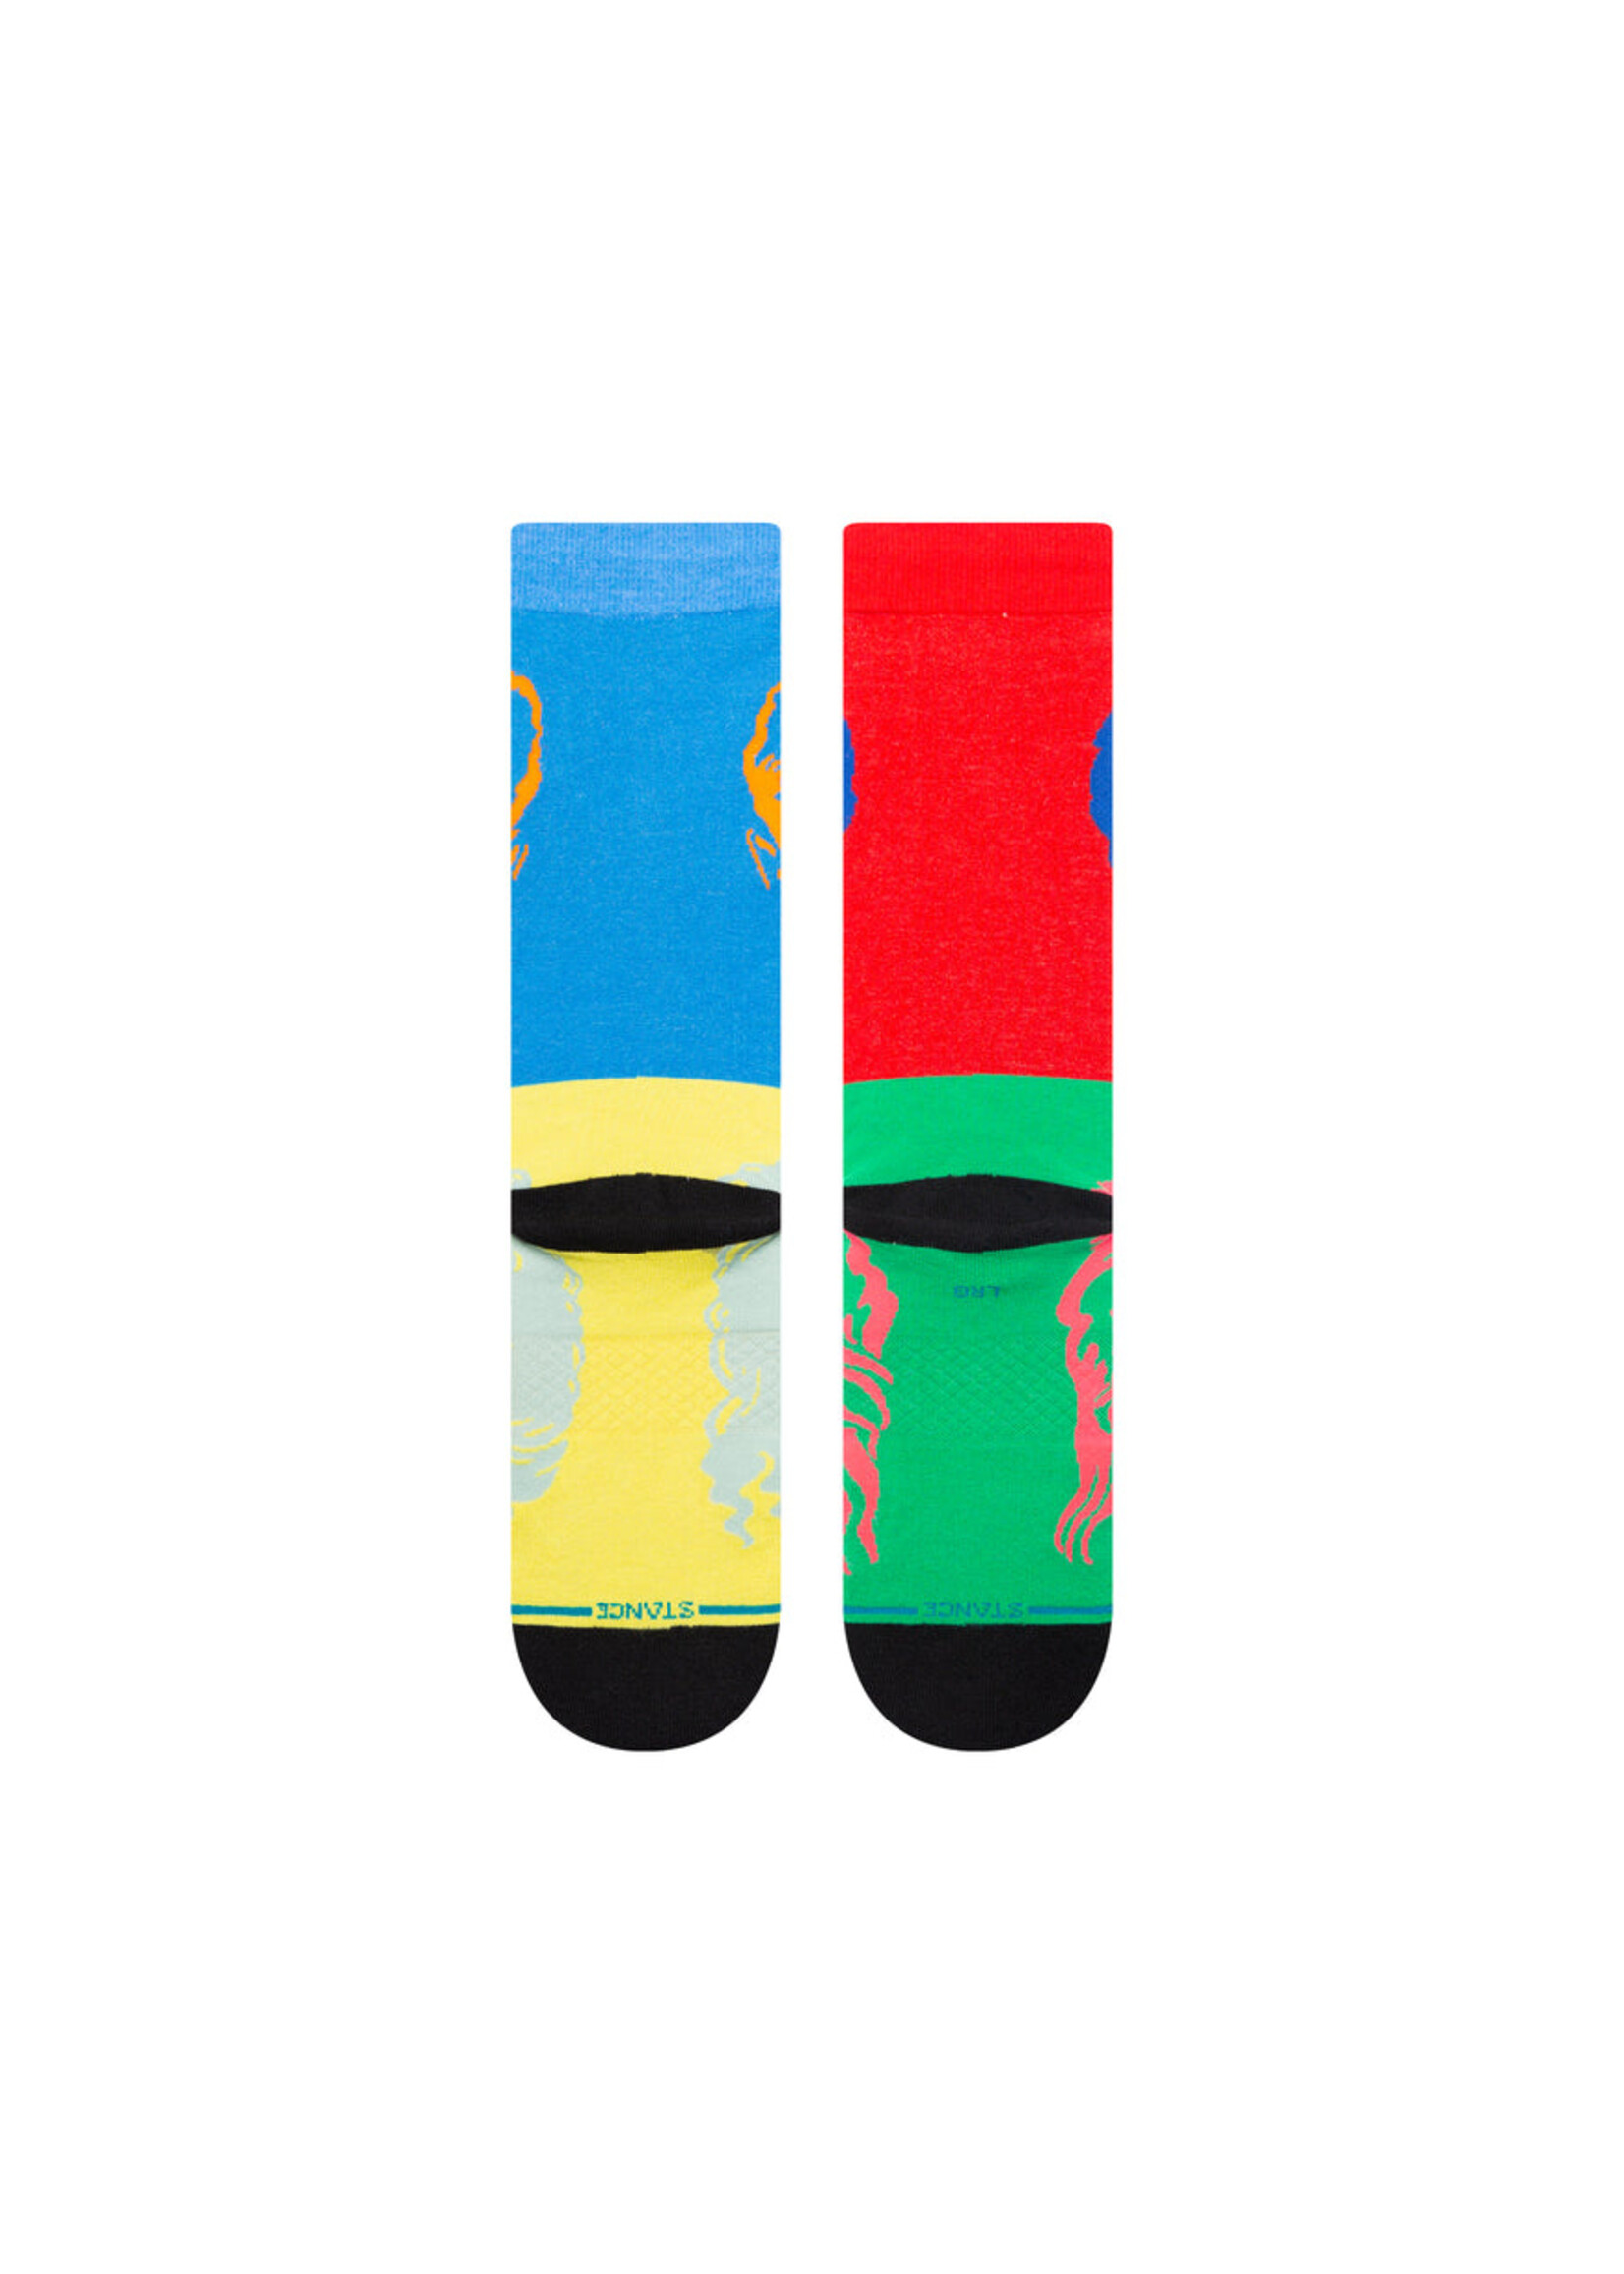 Stance QUEEN HOT SPACE SOCK F23